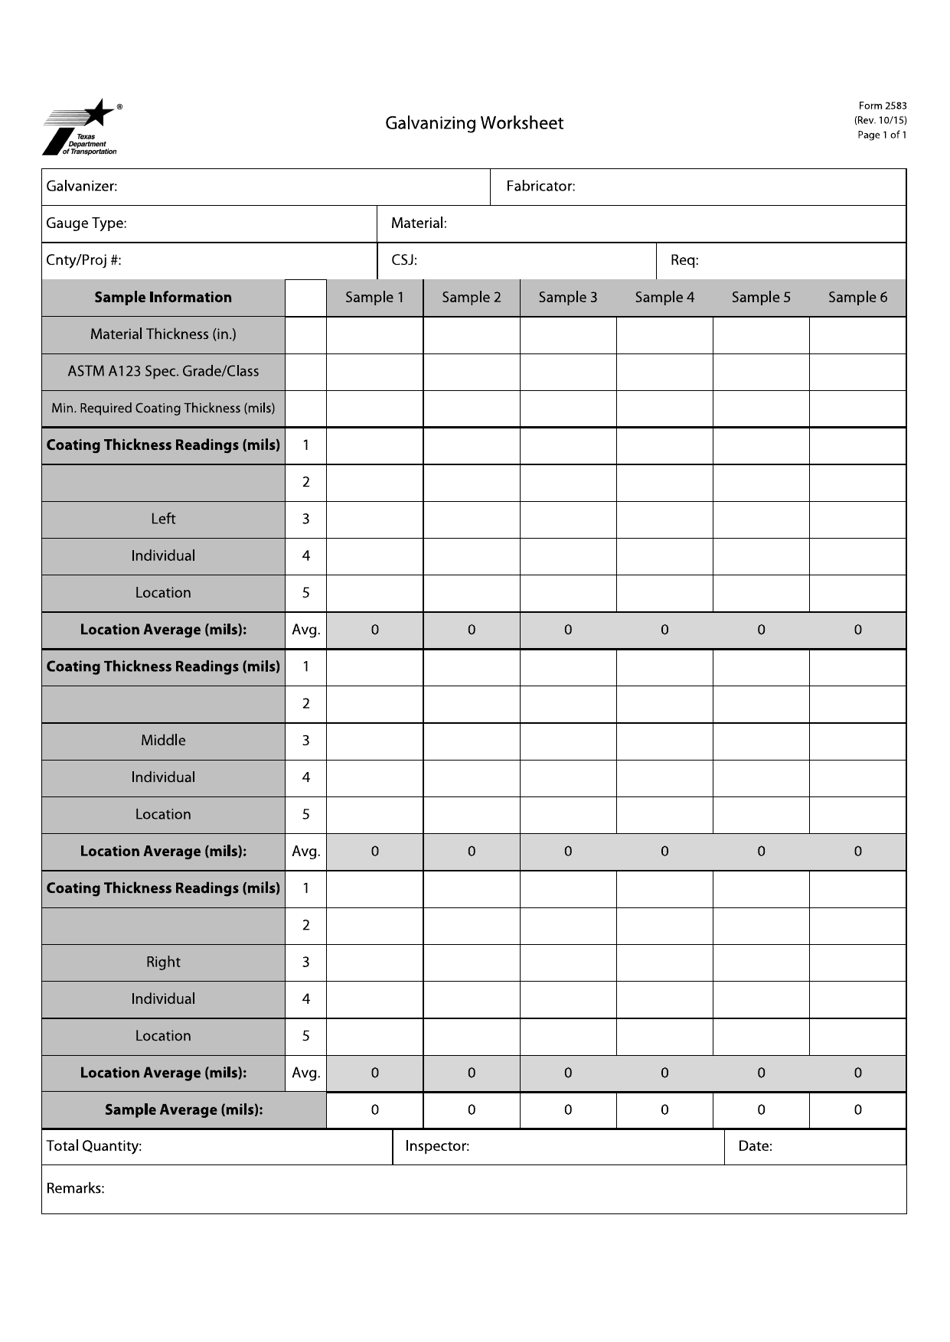 Form 2583 Galvanizing Worksheet - Texas, Page 1